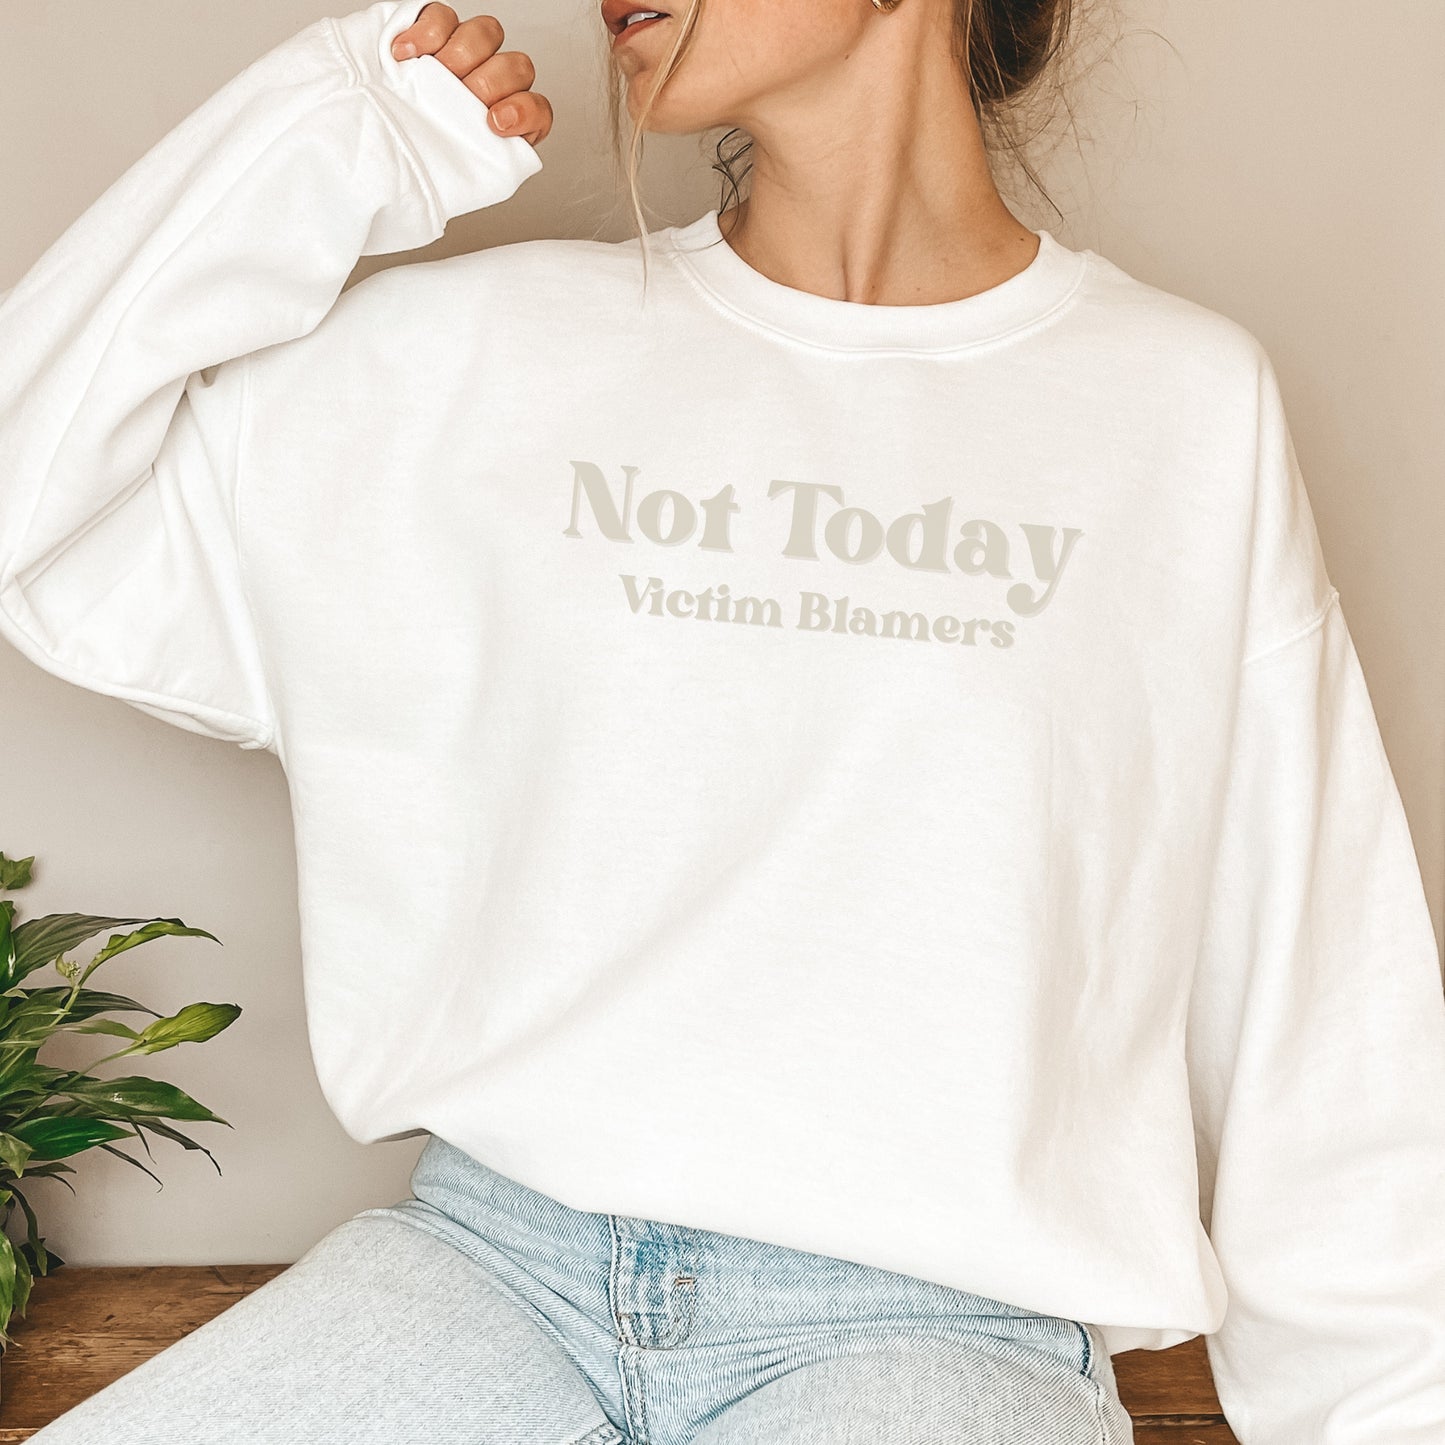 The front of the sweatshirt proudly displays the phrase "Not Today Victim Blamers" in a bold and eye-catching font. This message serves as a reminder that we reject victim-blaming and support those who have faced injustice.